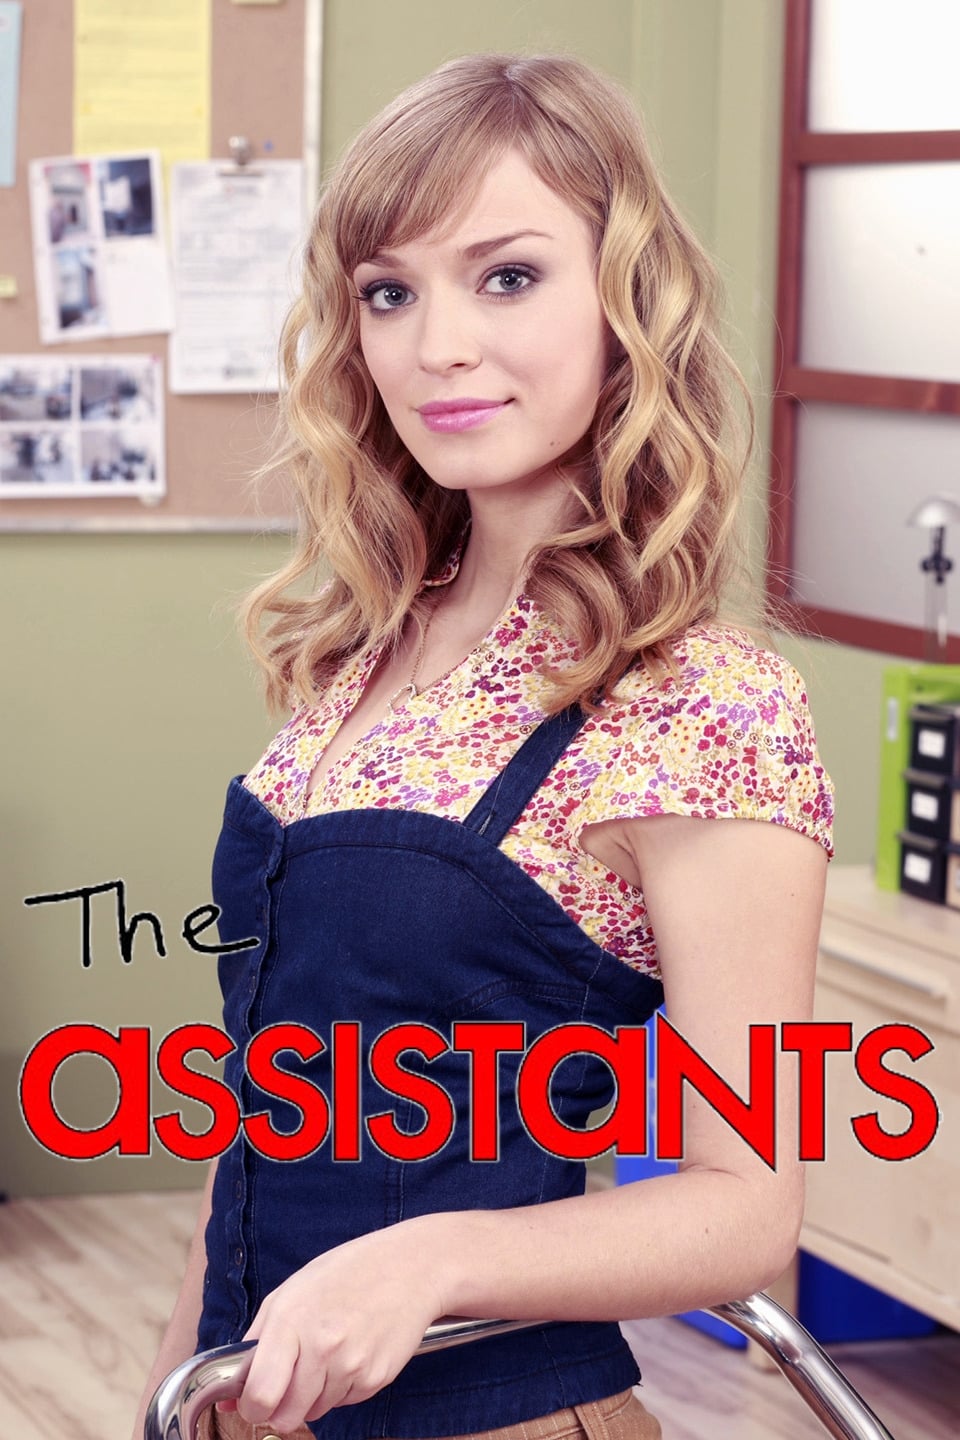 The Assistants (2009)